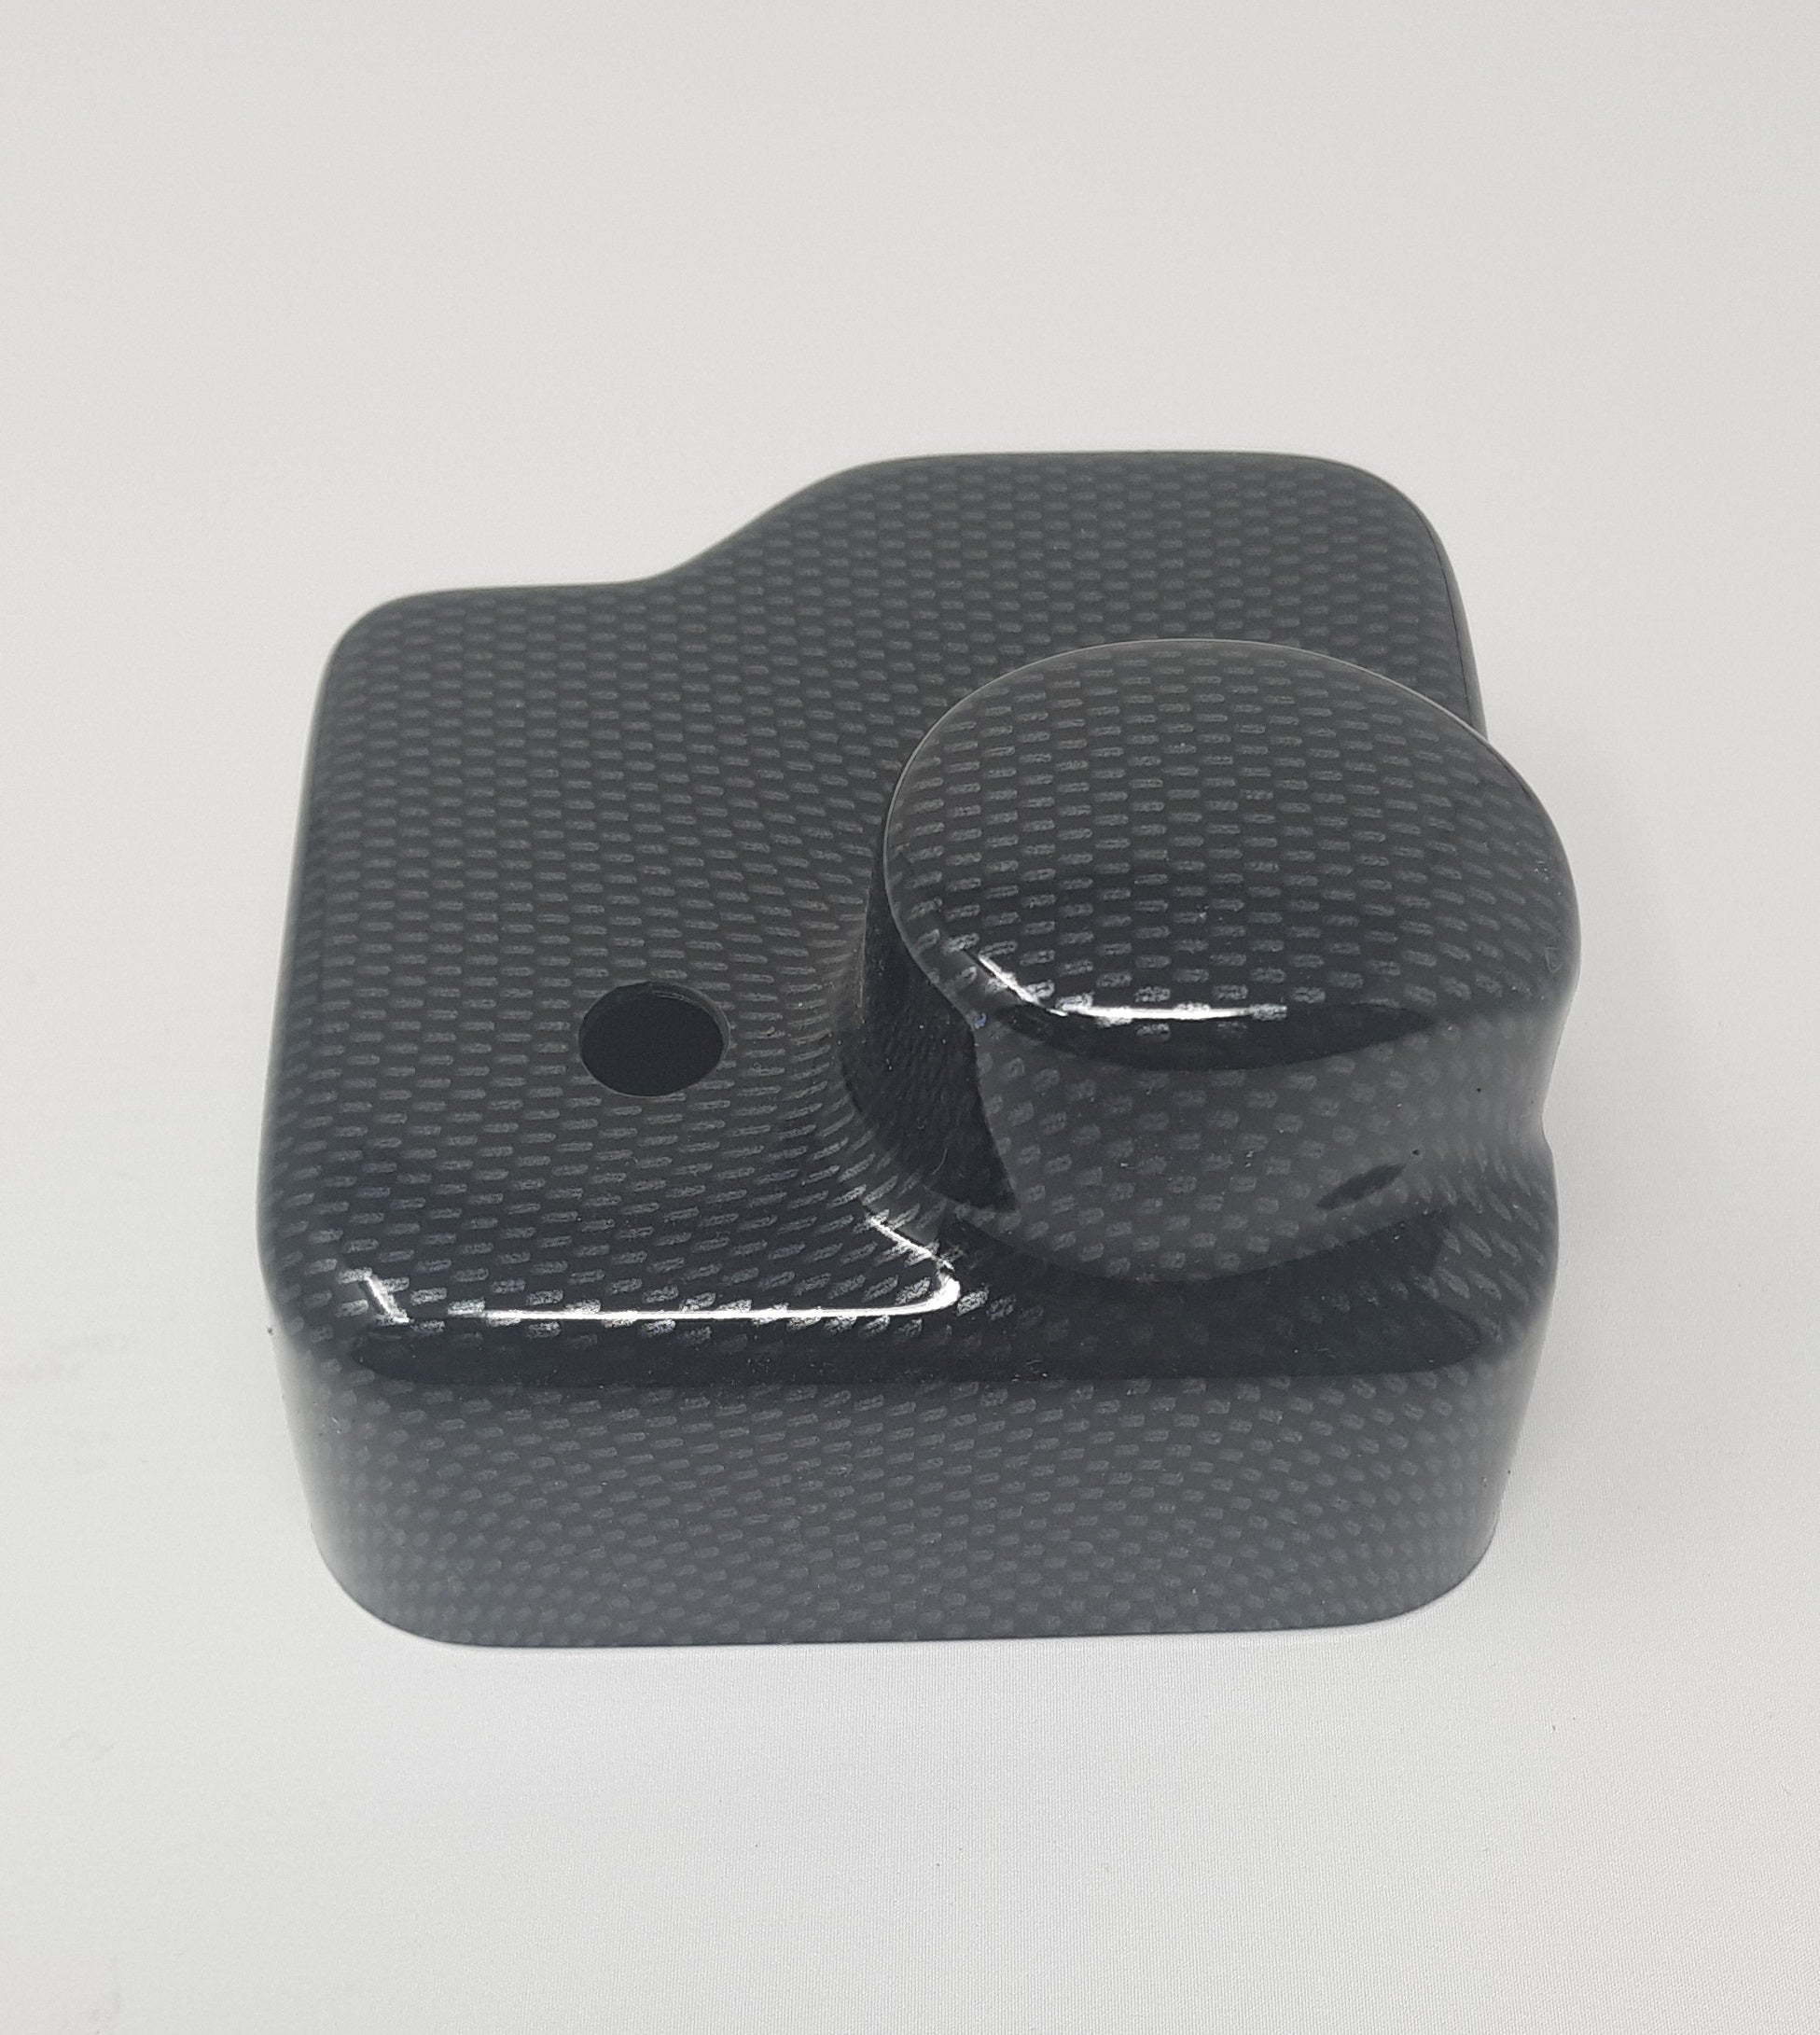 Proform Charcoal Canister Cover - Mk5 Volkswagen Golf (Plastic Finishes)